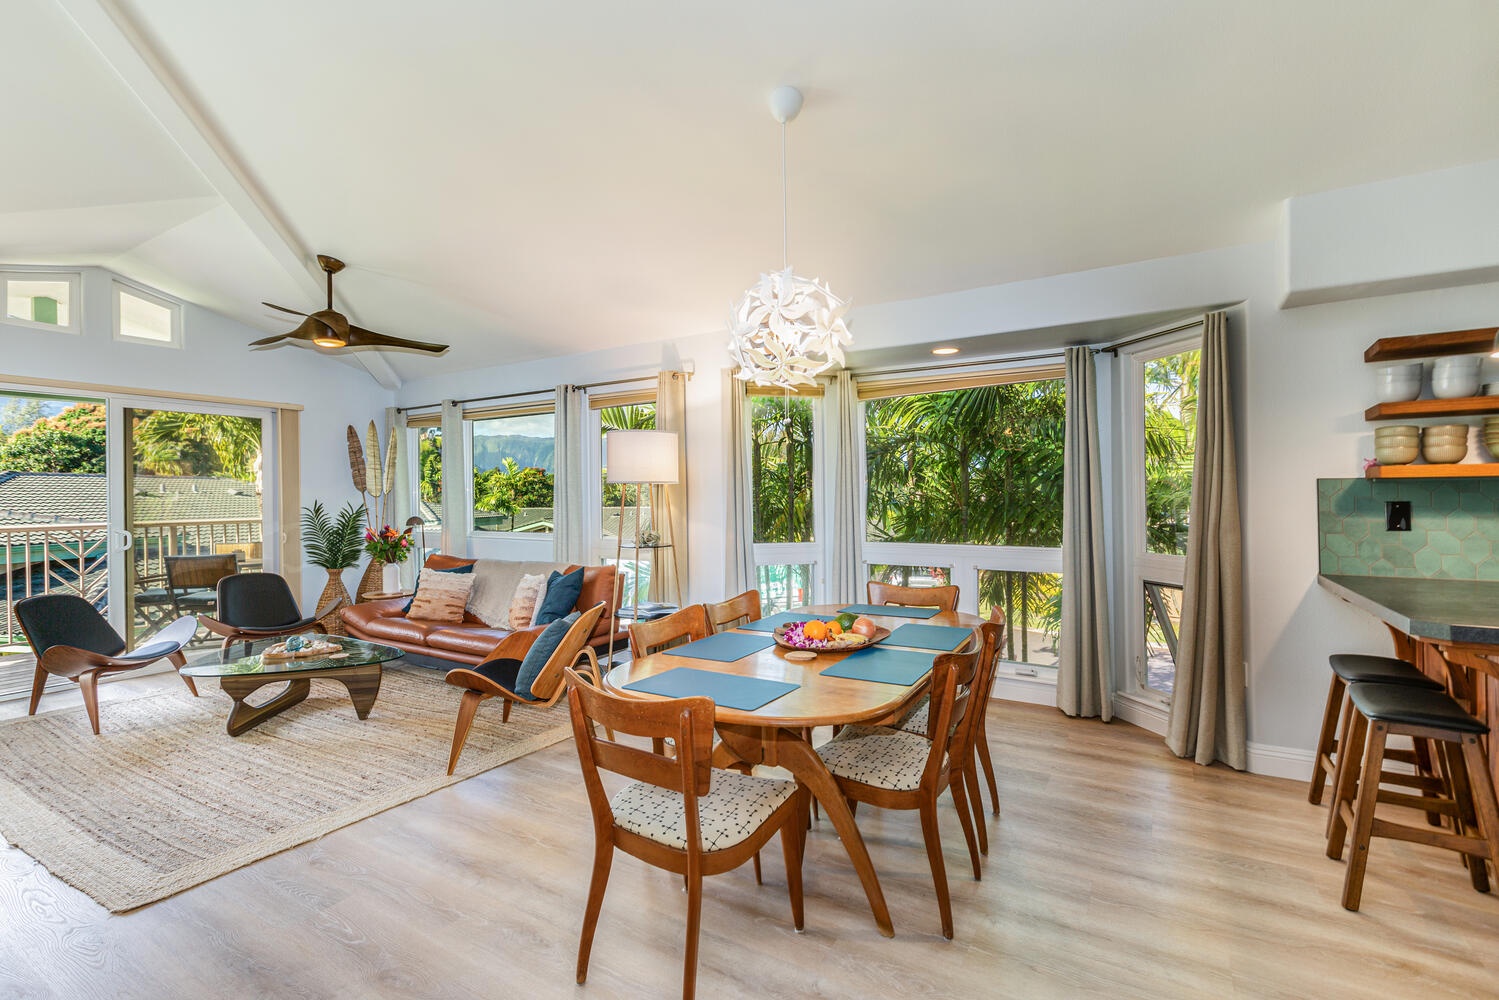 Princeville Vacation Rentals, Sea Glass - Living area with rustic table for six right off the living area.